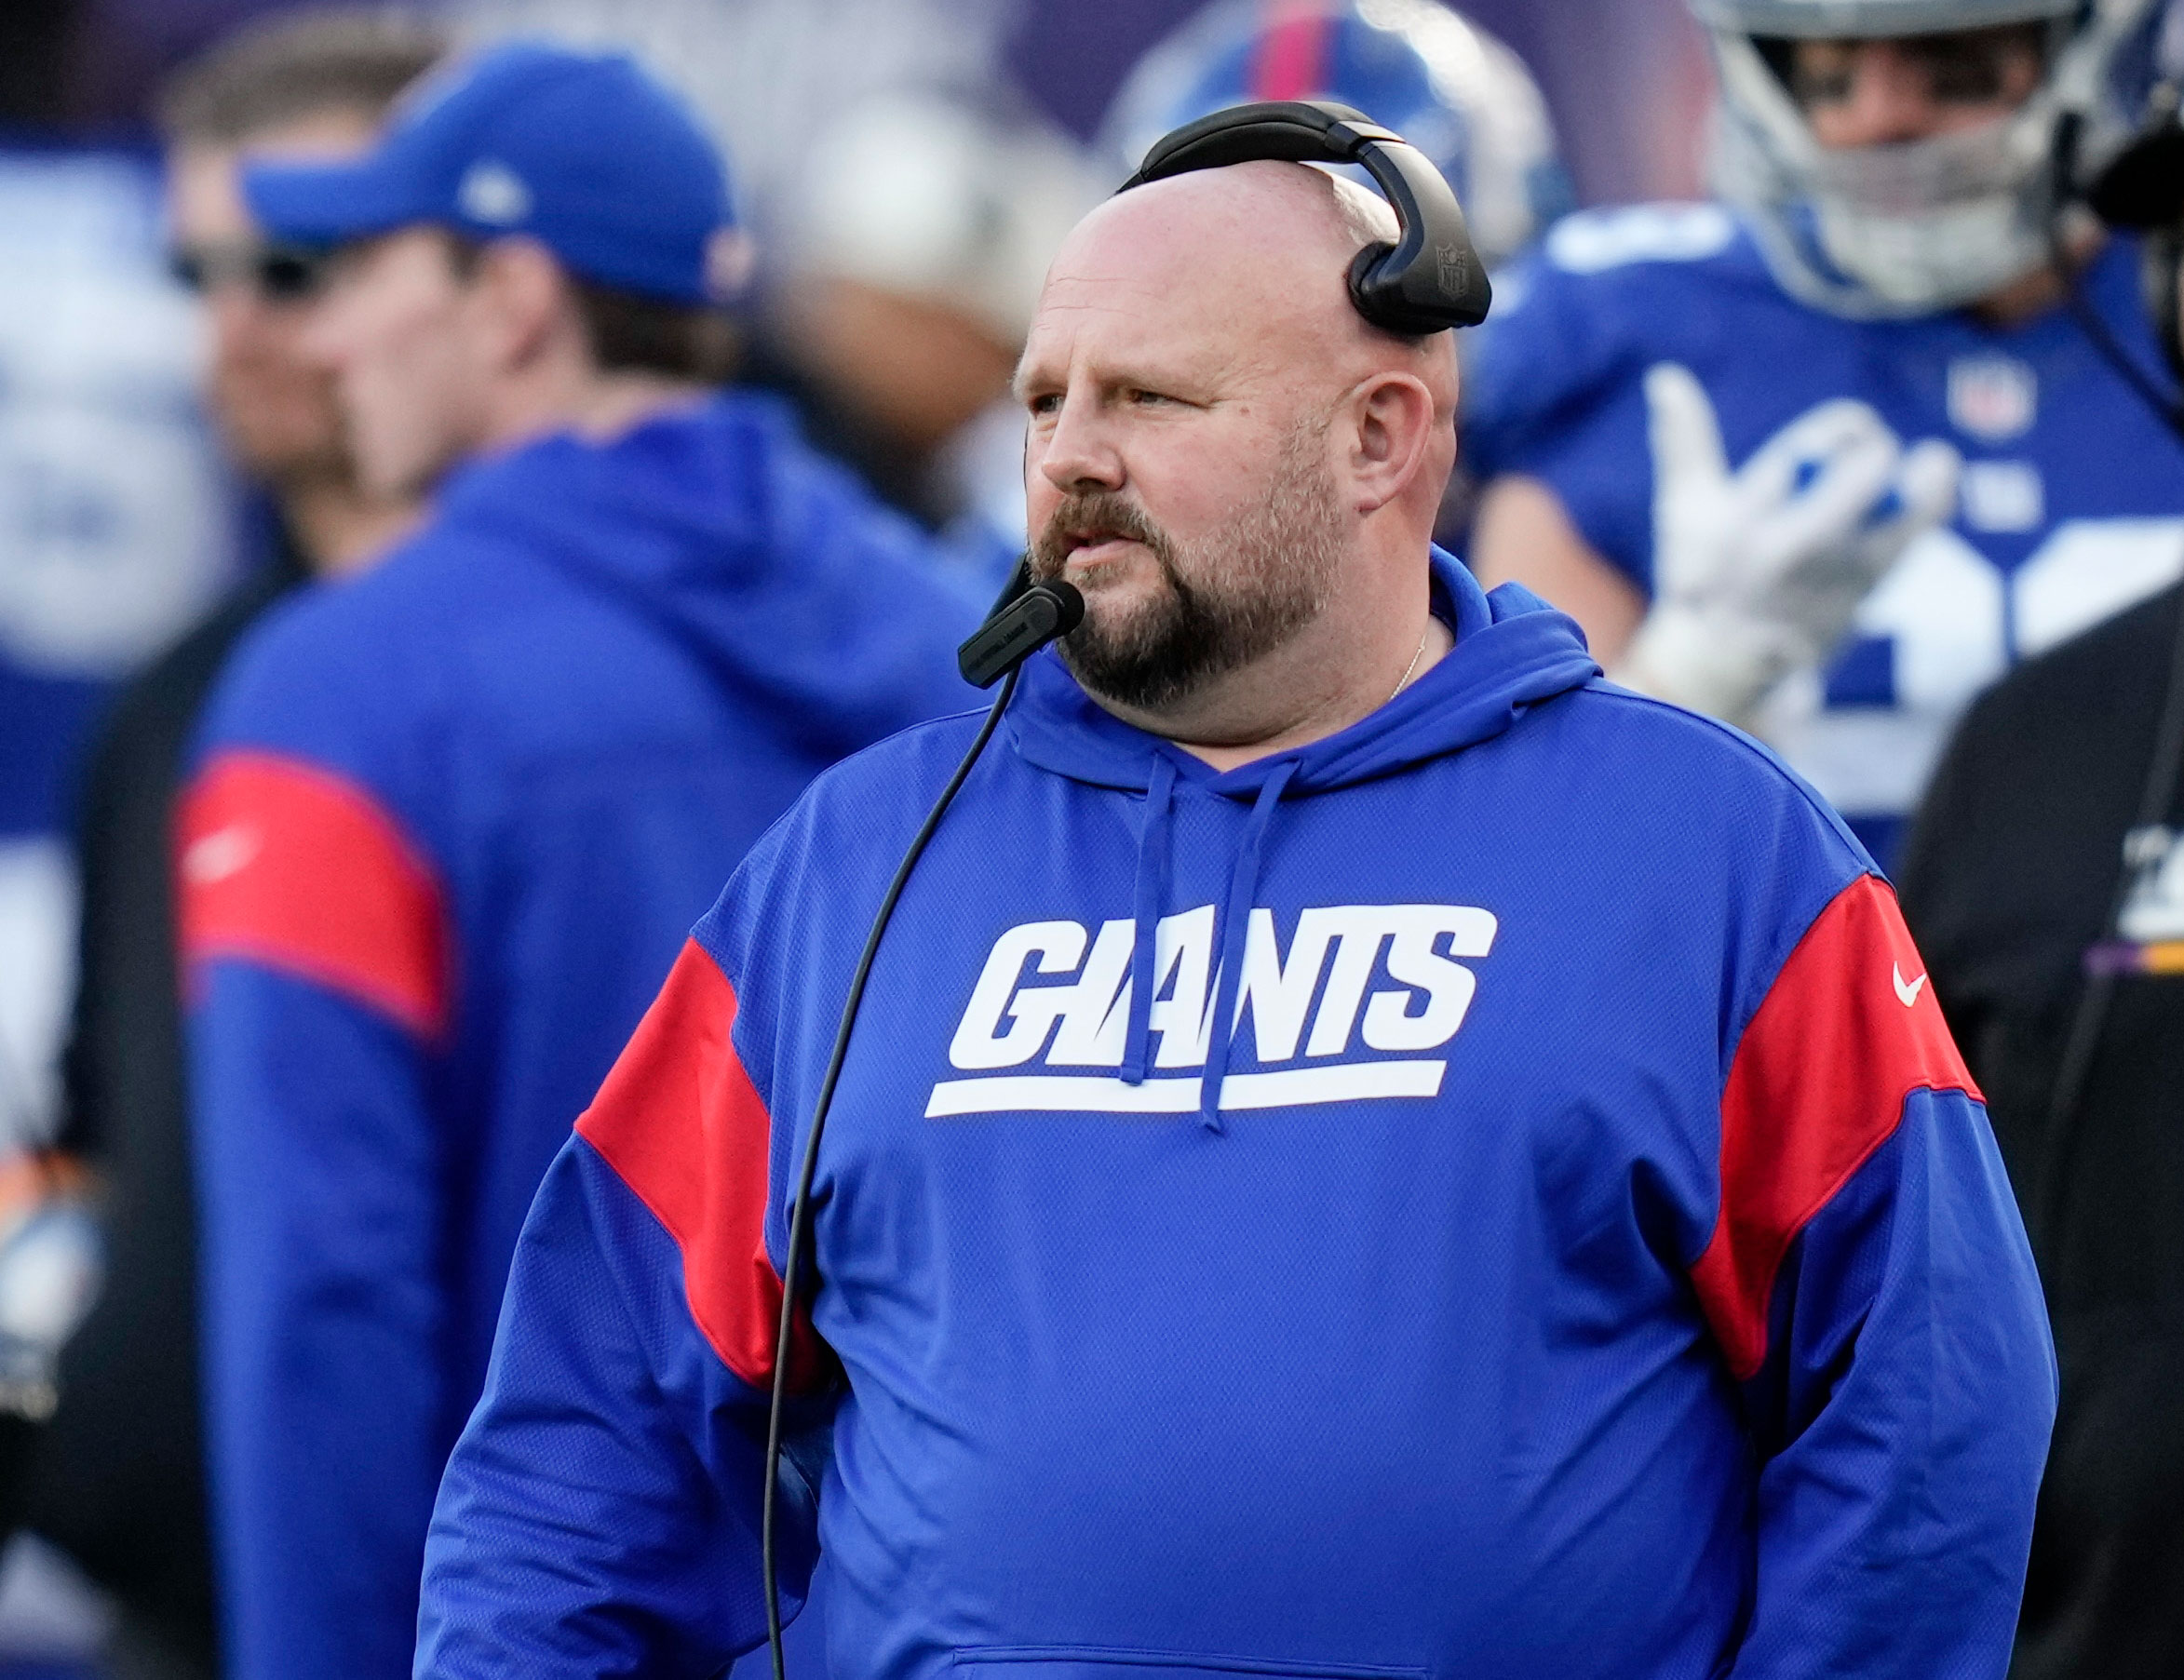 New York Giants head coach Brian Daboll coaches from the sidelines during the Giants' game against the Indianapolis Colts on January 1. 